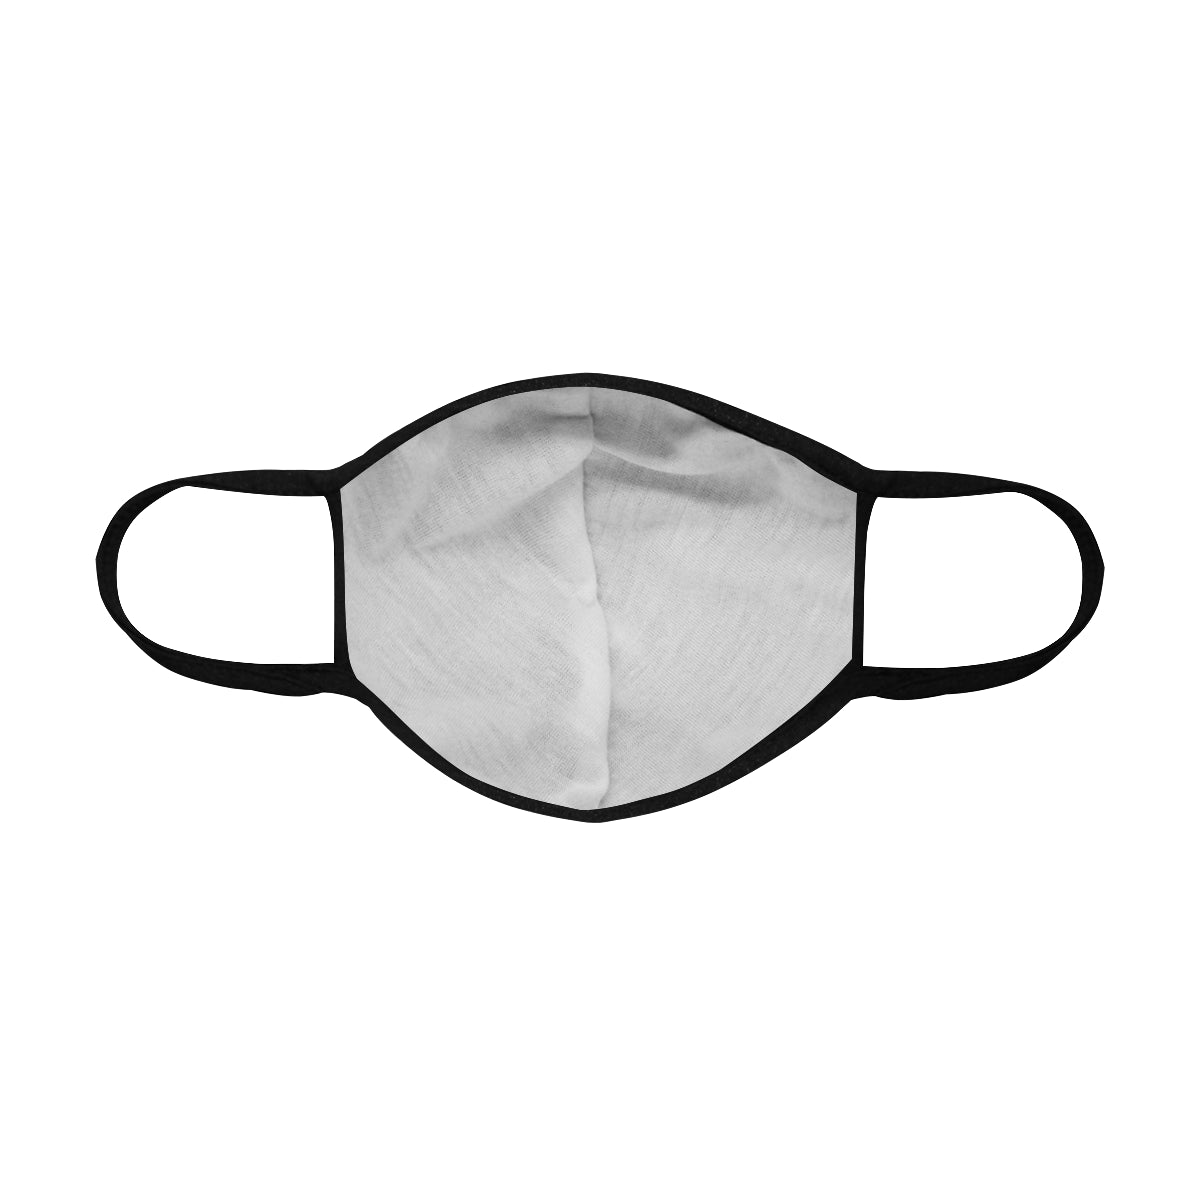 AfriBix Sky Galaxy Cotton Fabric Face Mask with filter slot (30 Filters Included) - Non-medical use